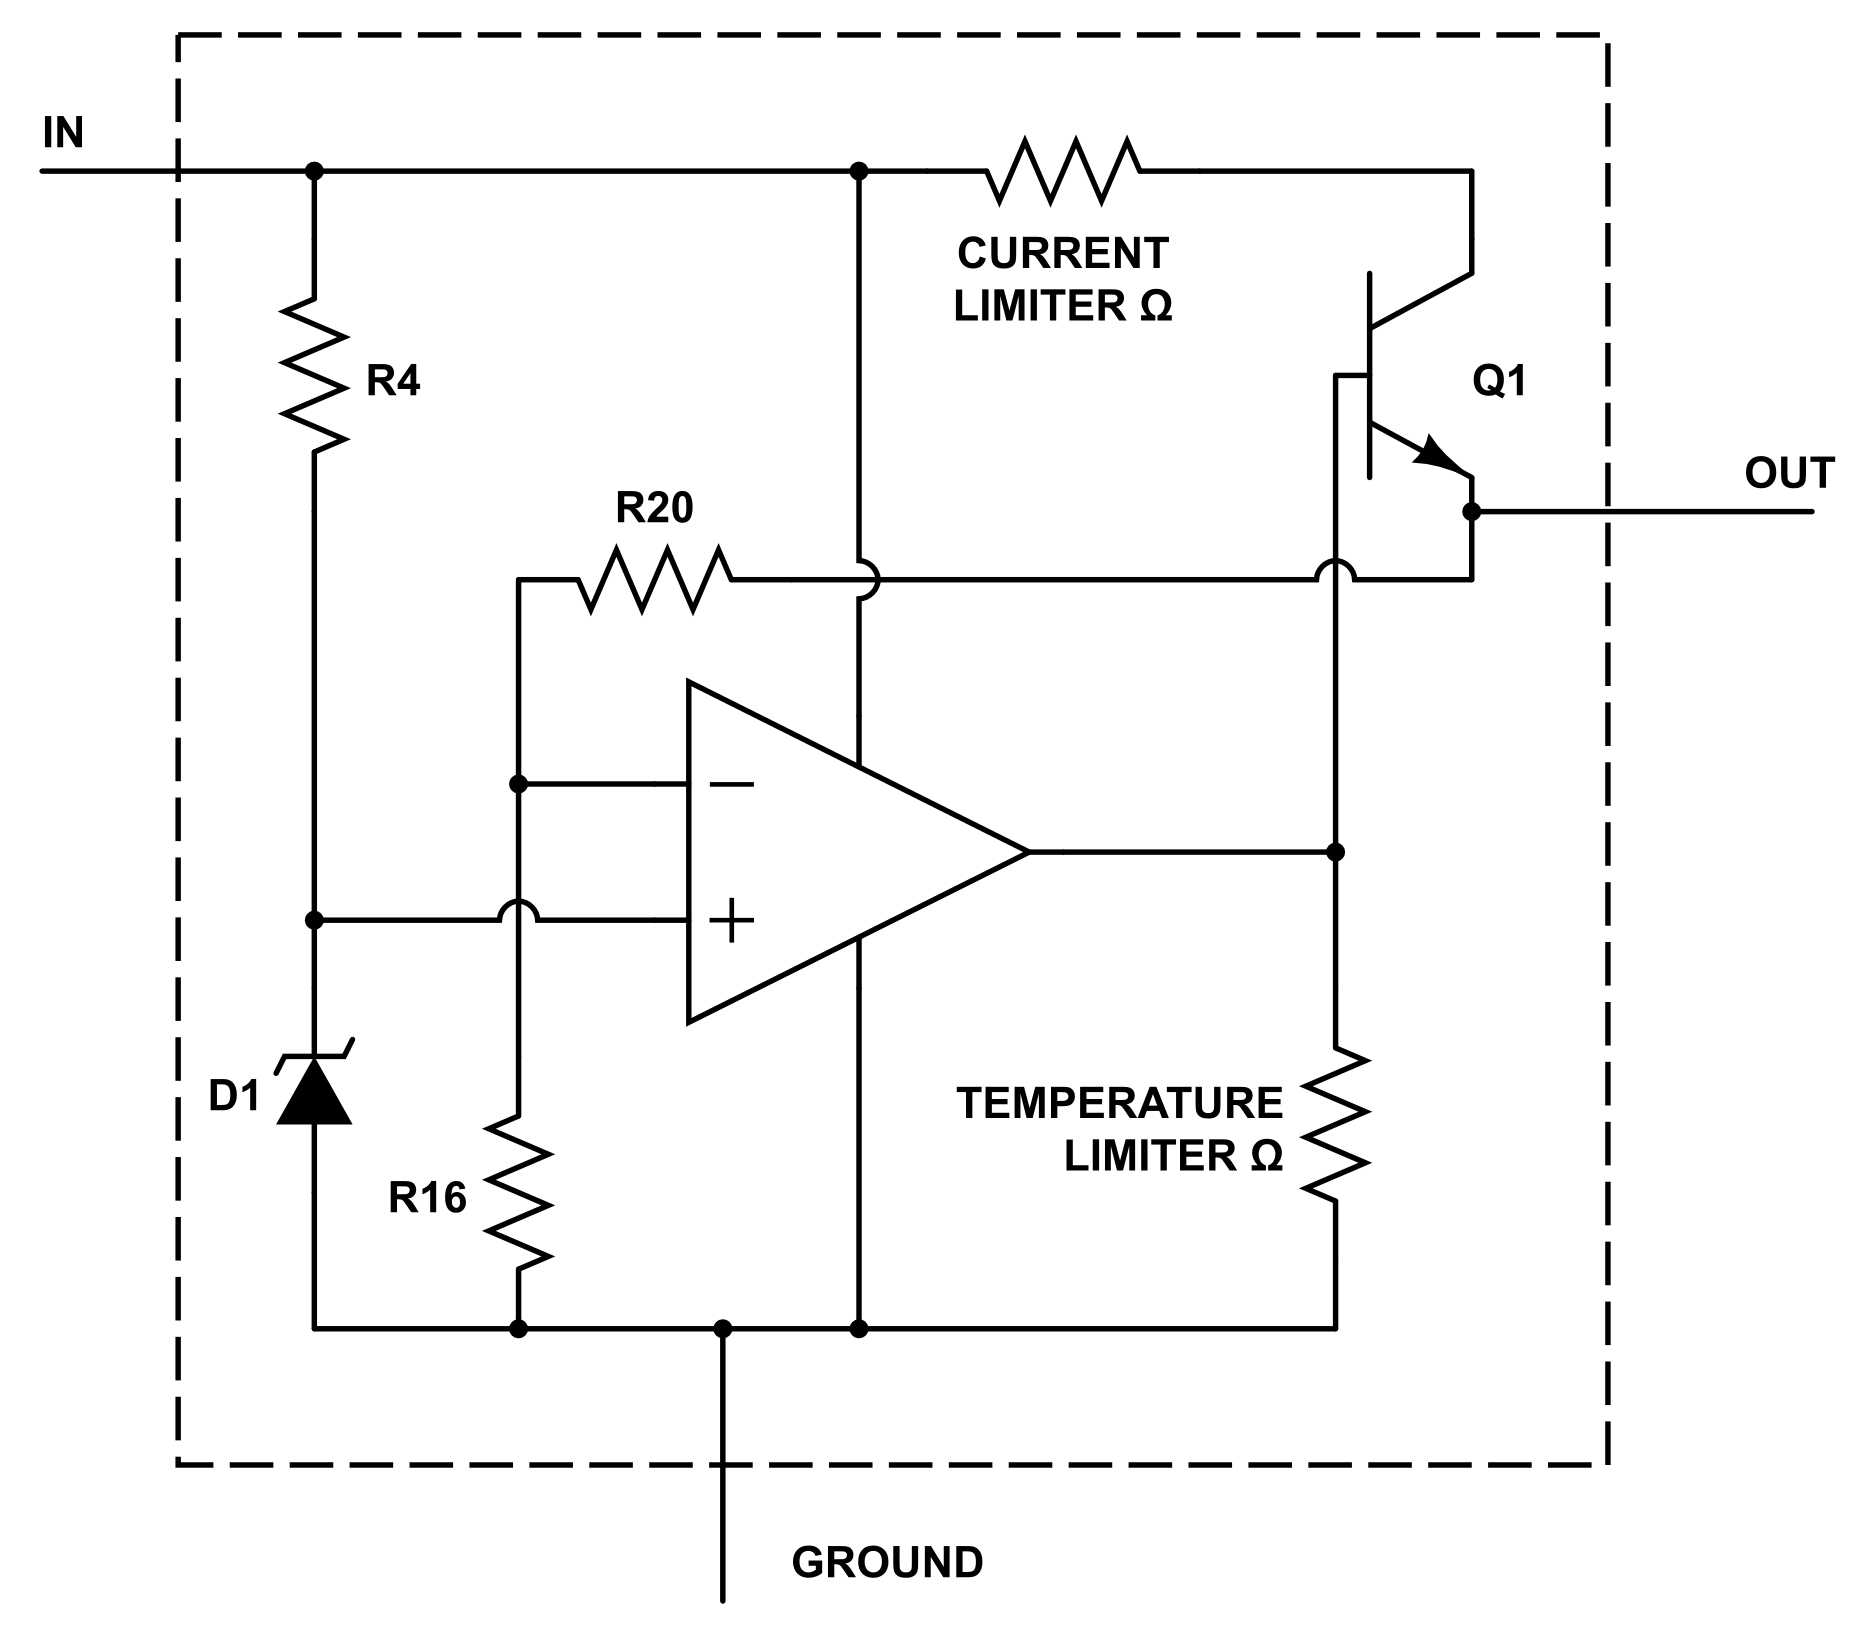 Figure 3. Example internal schematic of a typical 7805-like linear regulator